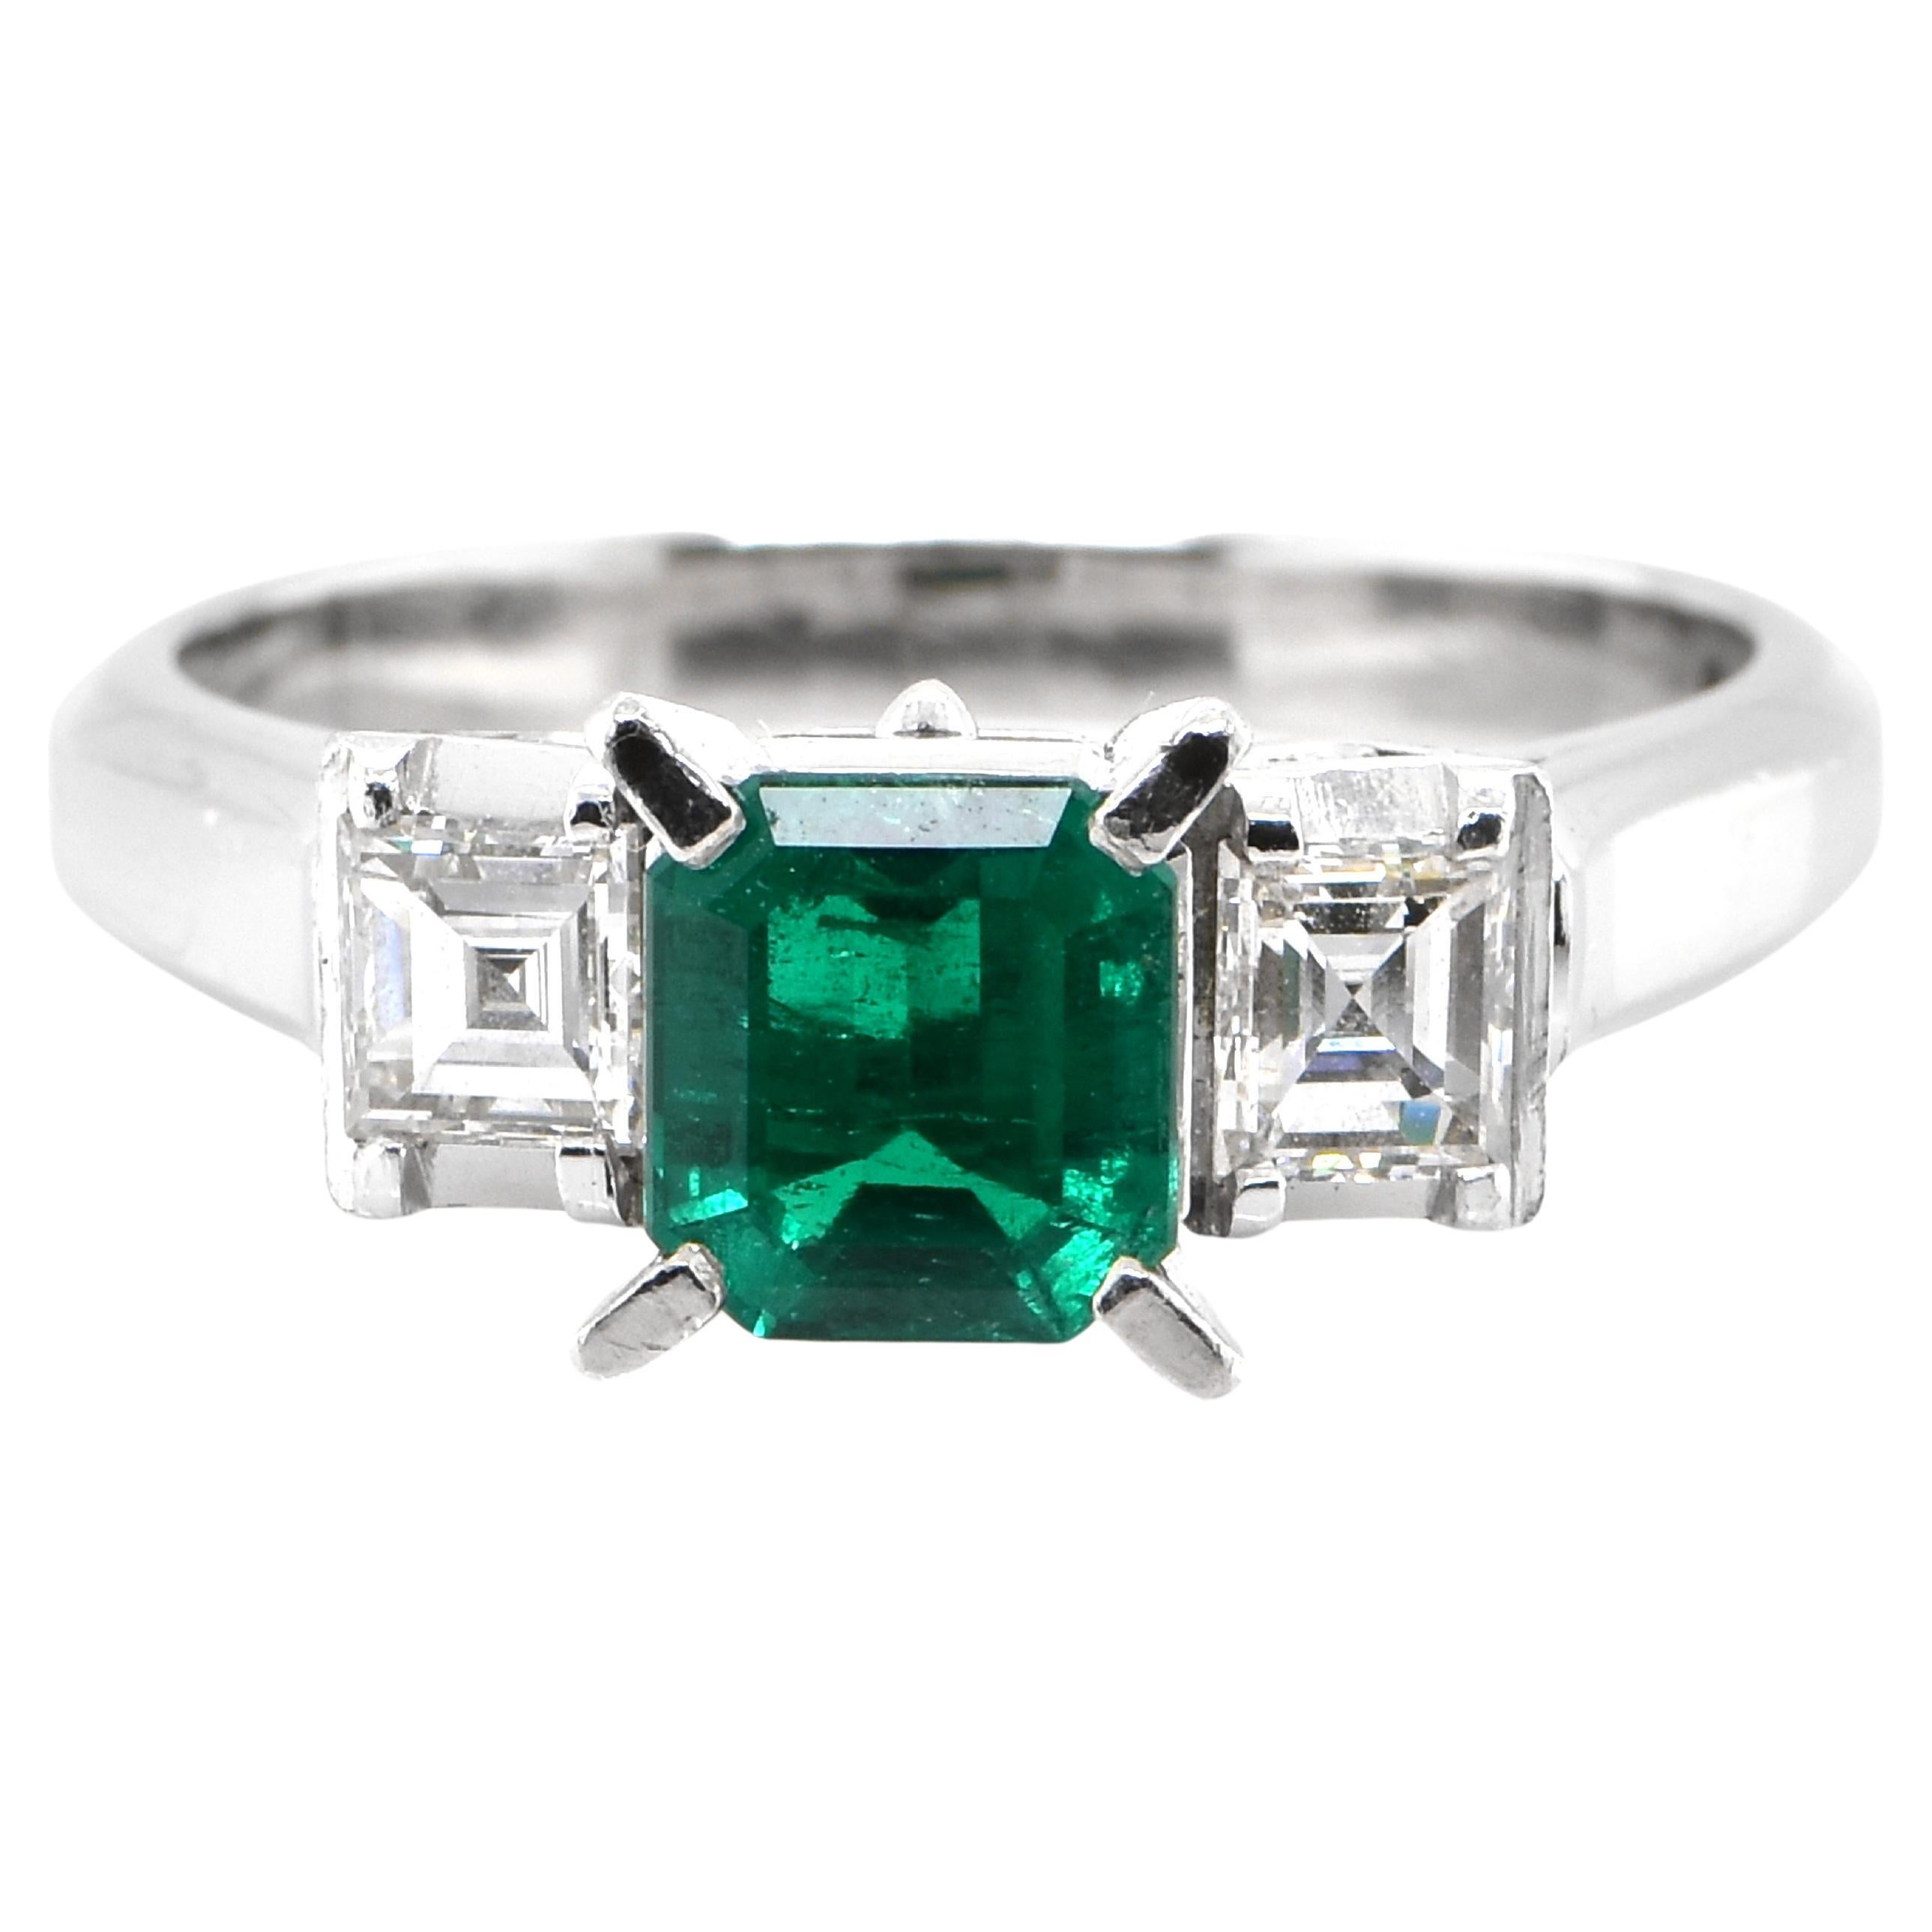 GIA Certified 0.97 Carat 'No Oil' (Untreated), Colombian Emerald & Diamond Ring For Sale